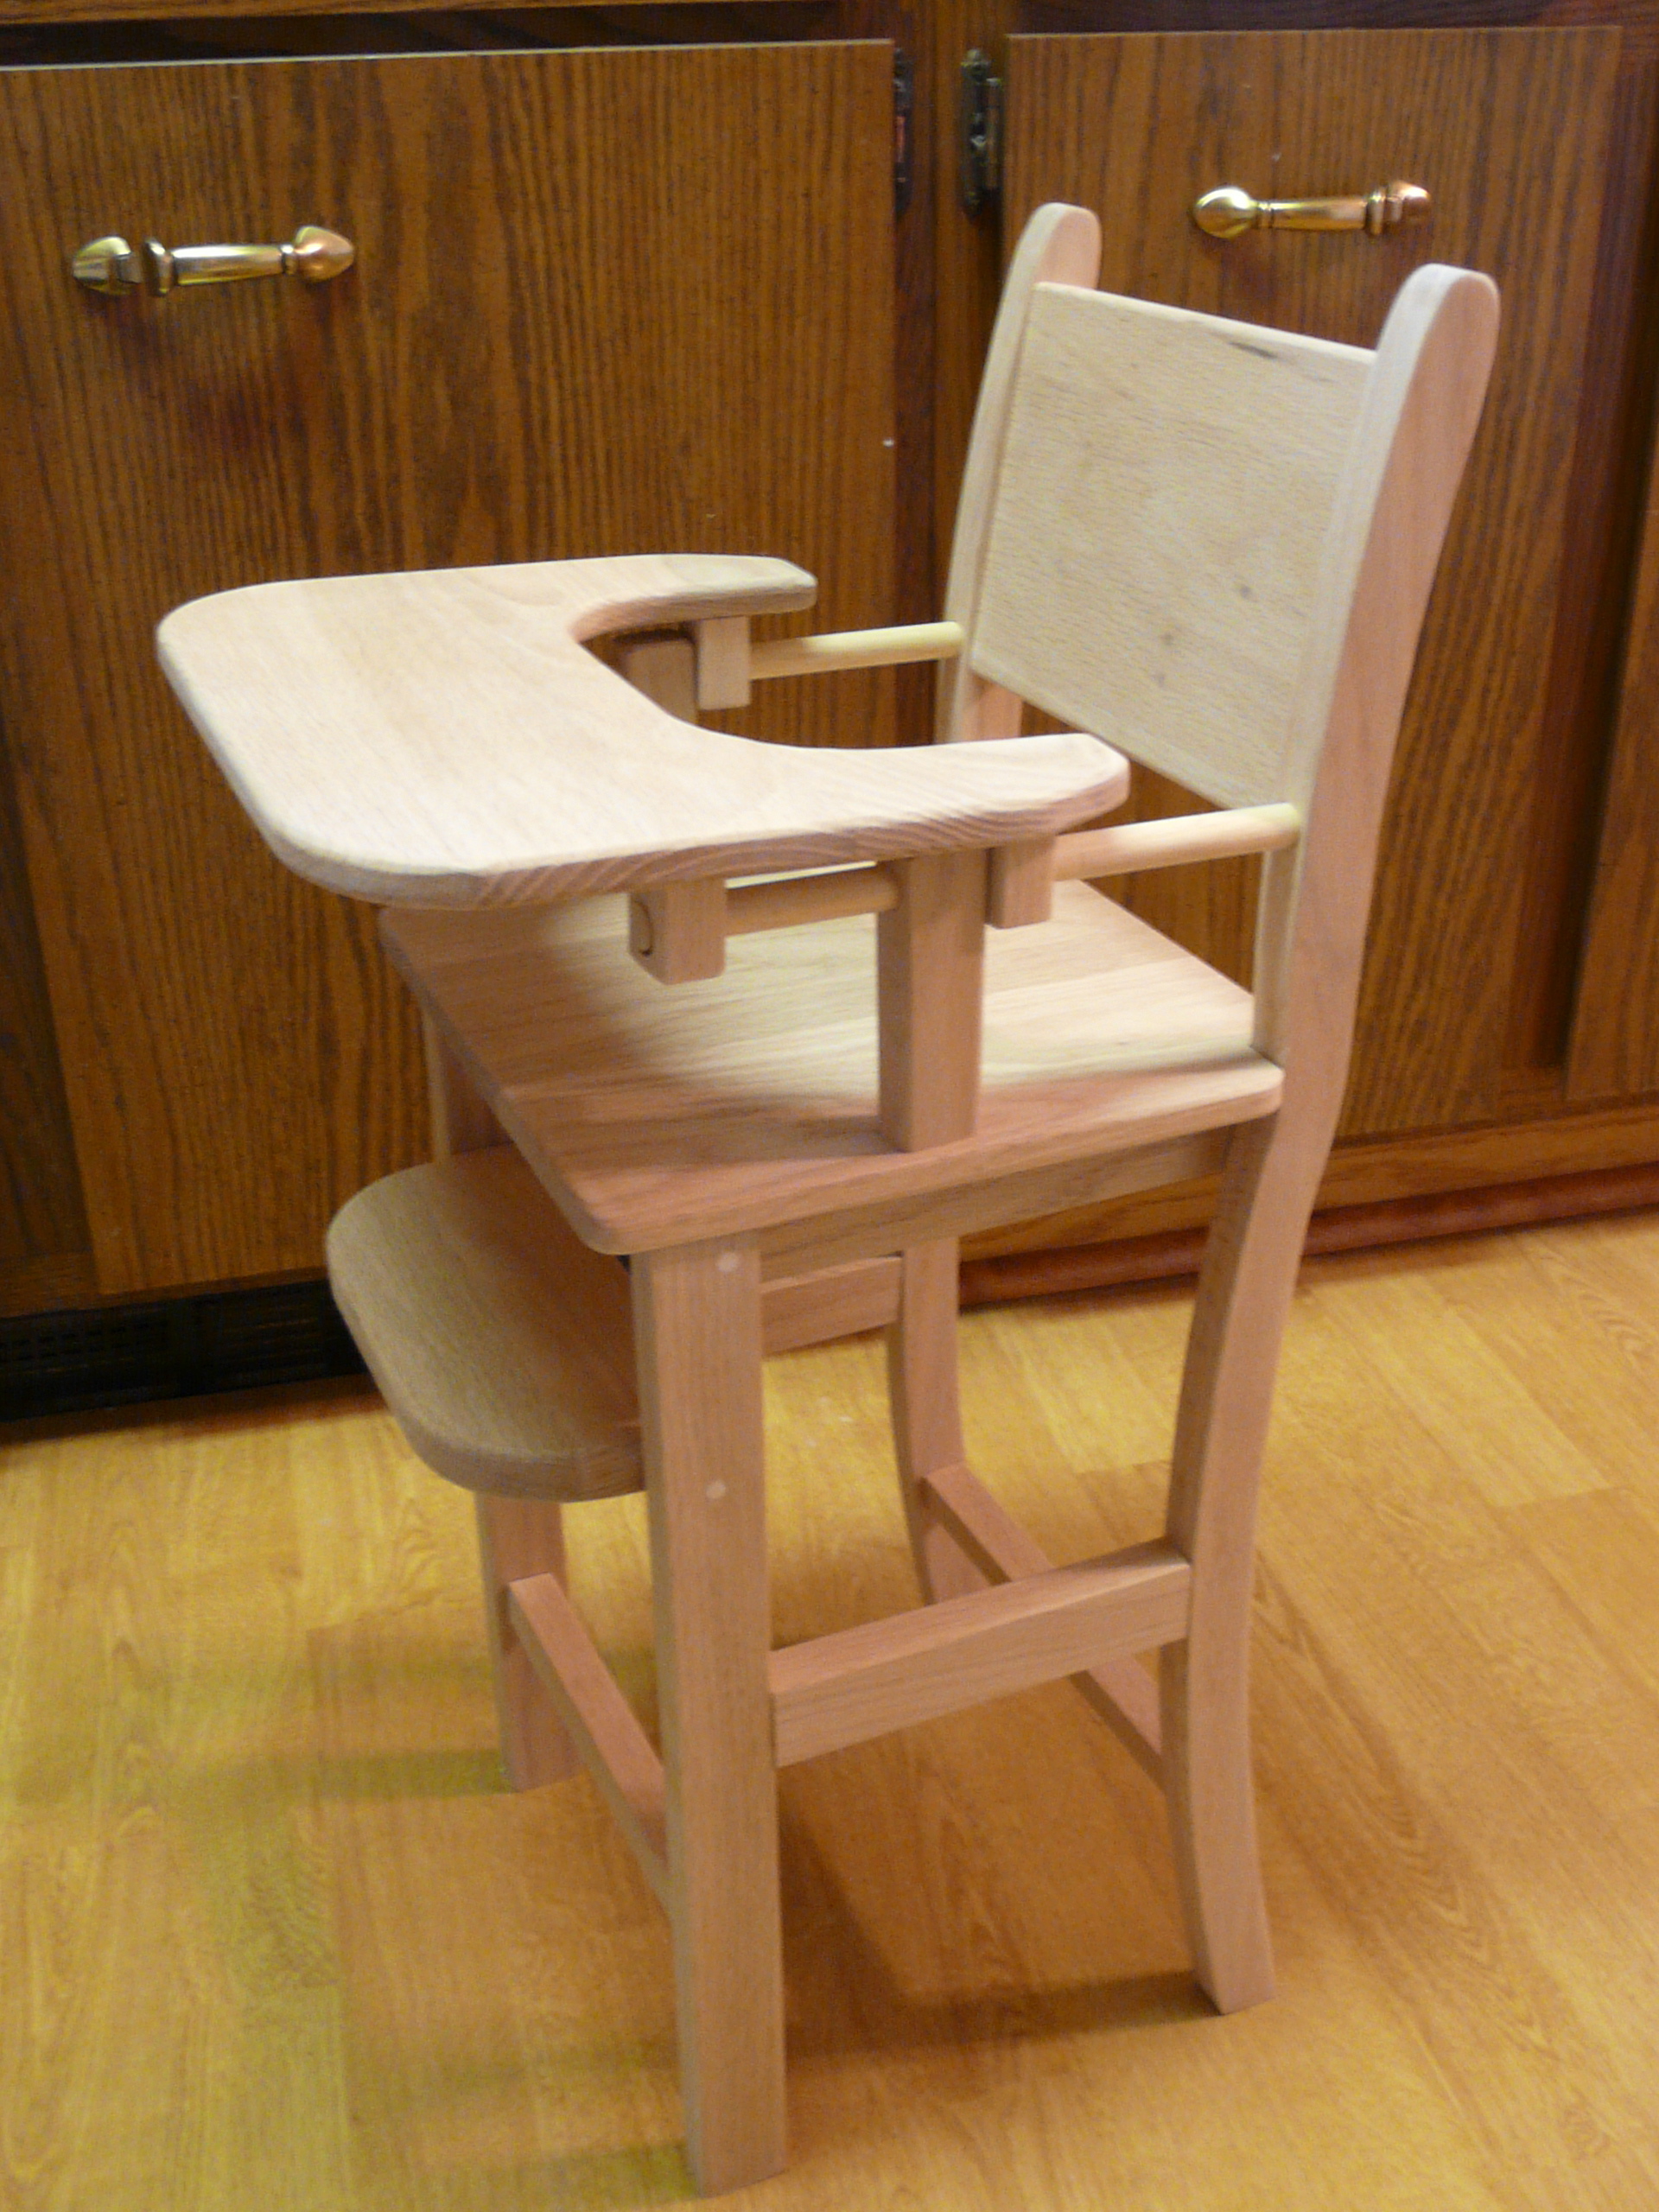 Wood Projects: doll high chair &amp; Welcome sign Â« Thoughts 